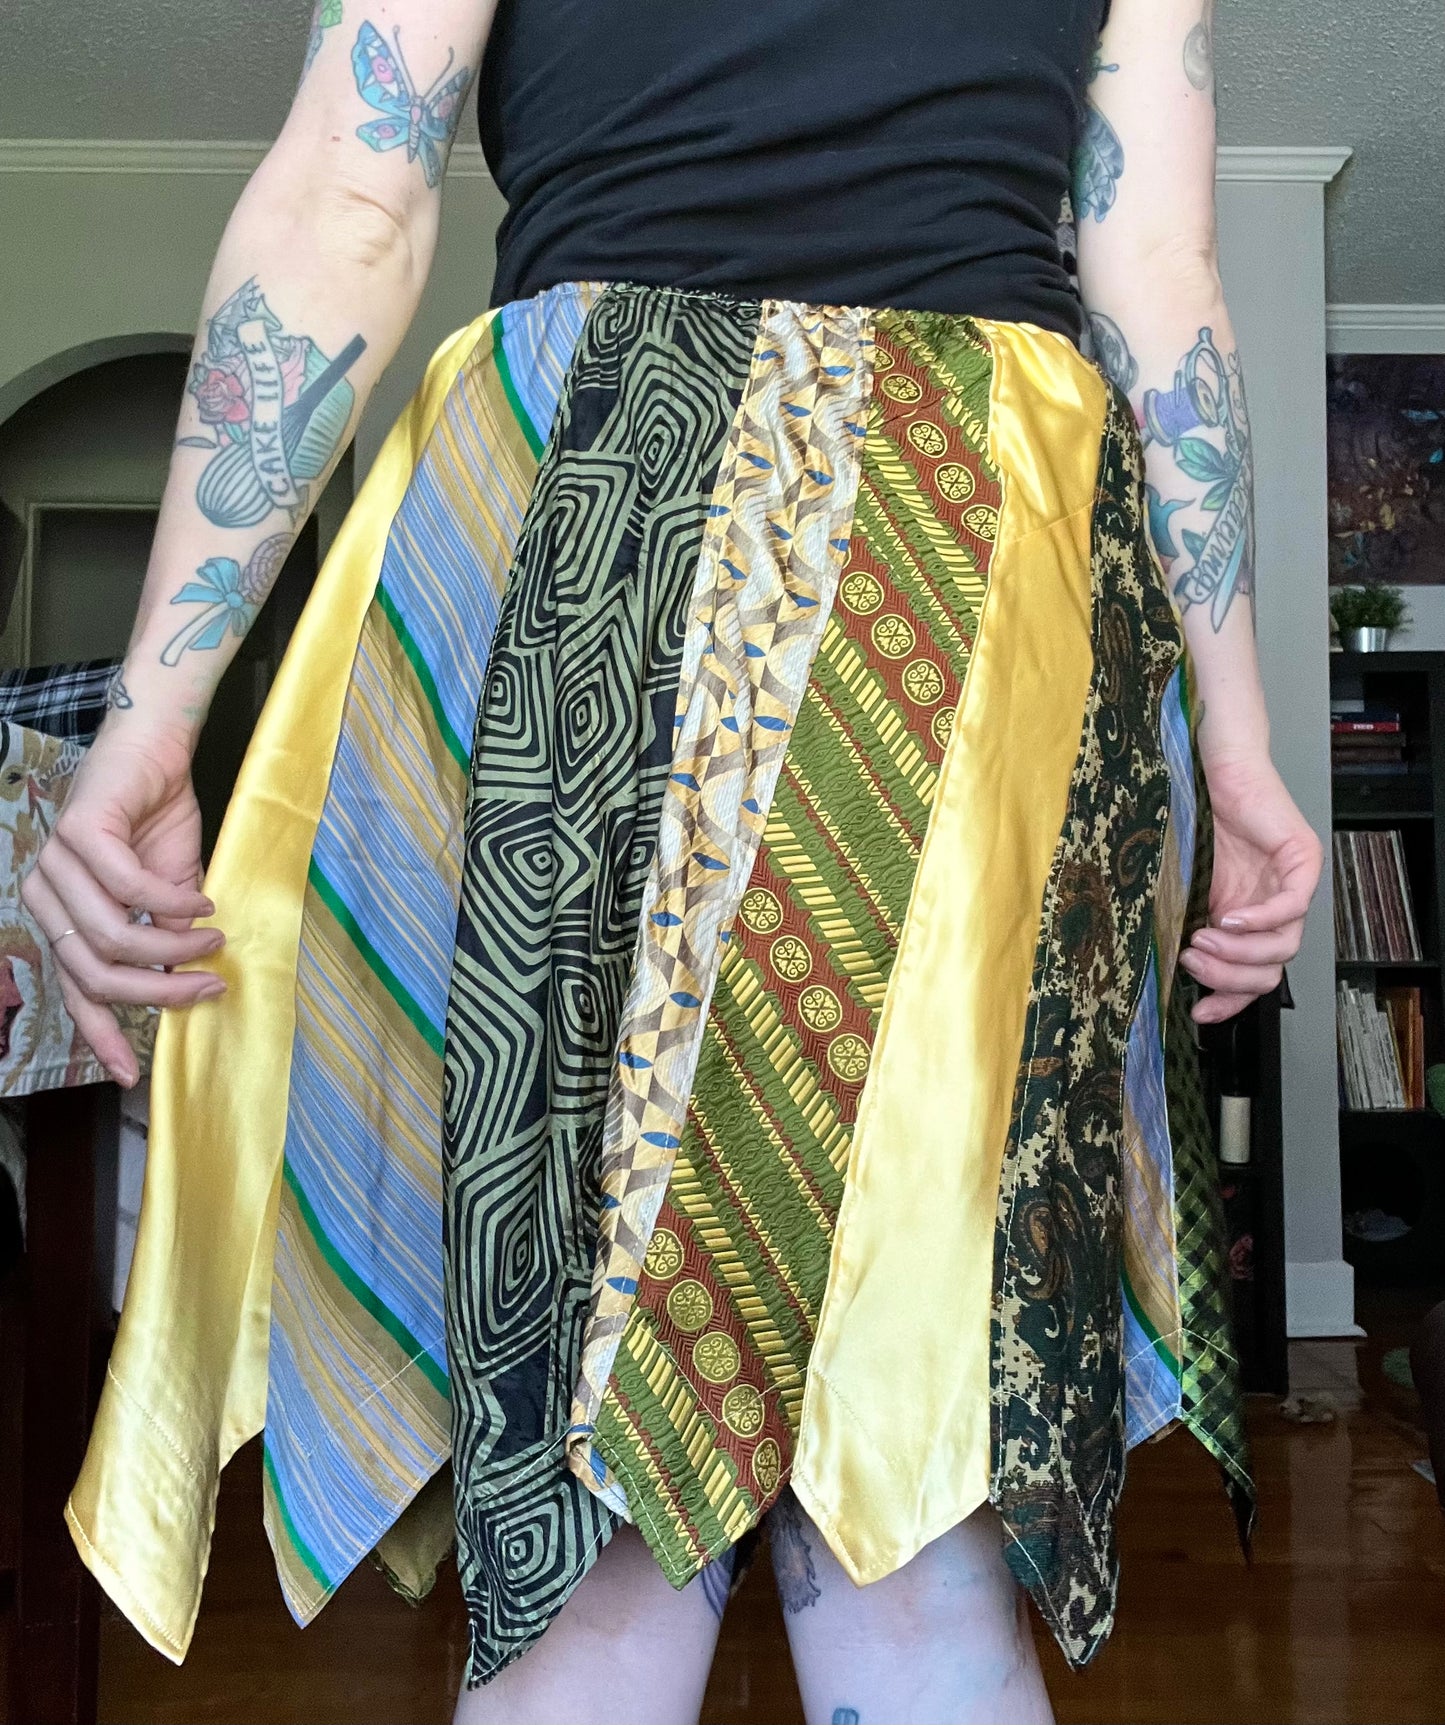 Green and yellow necktie skirt, back view, modeled and held out to the side